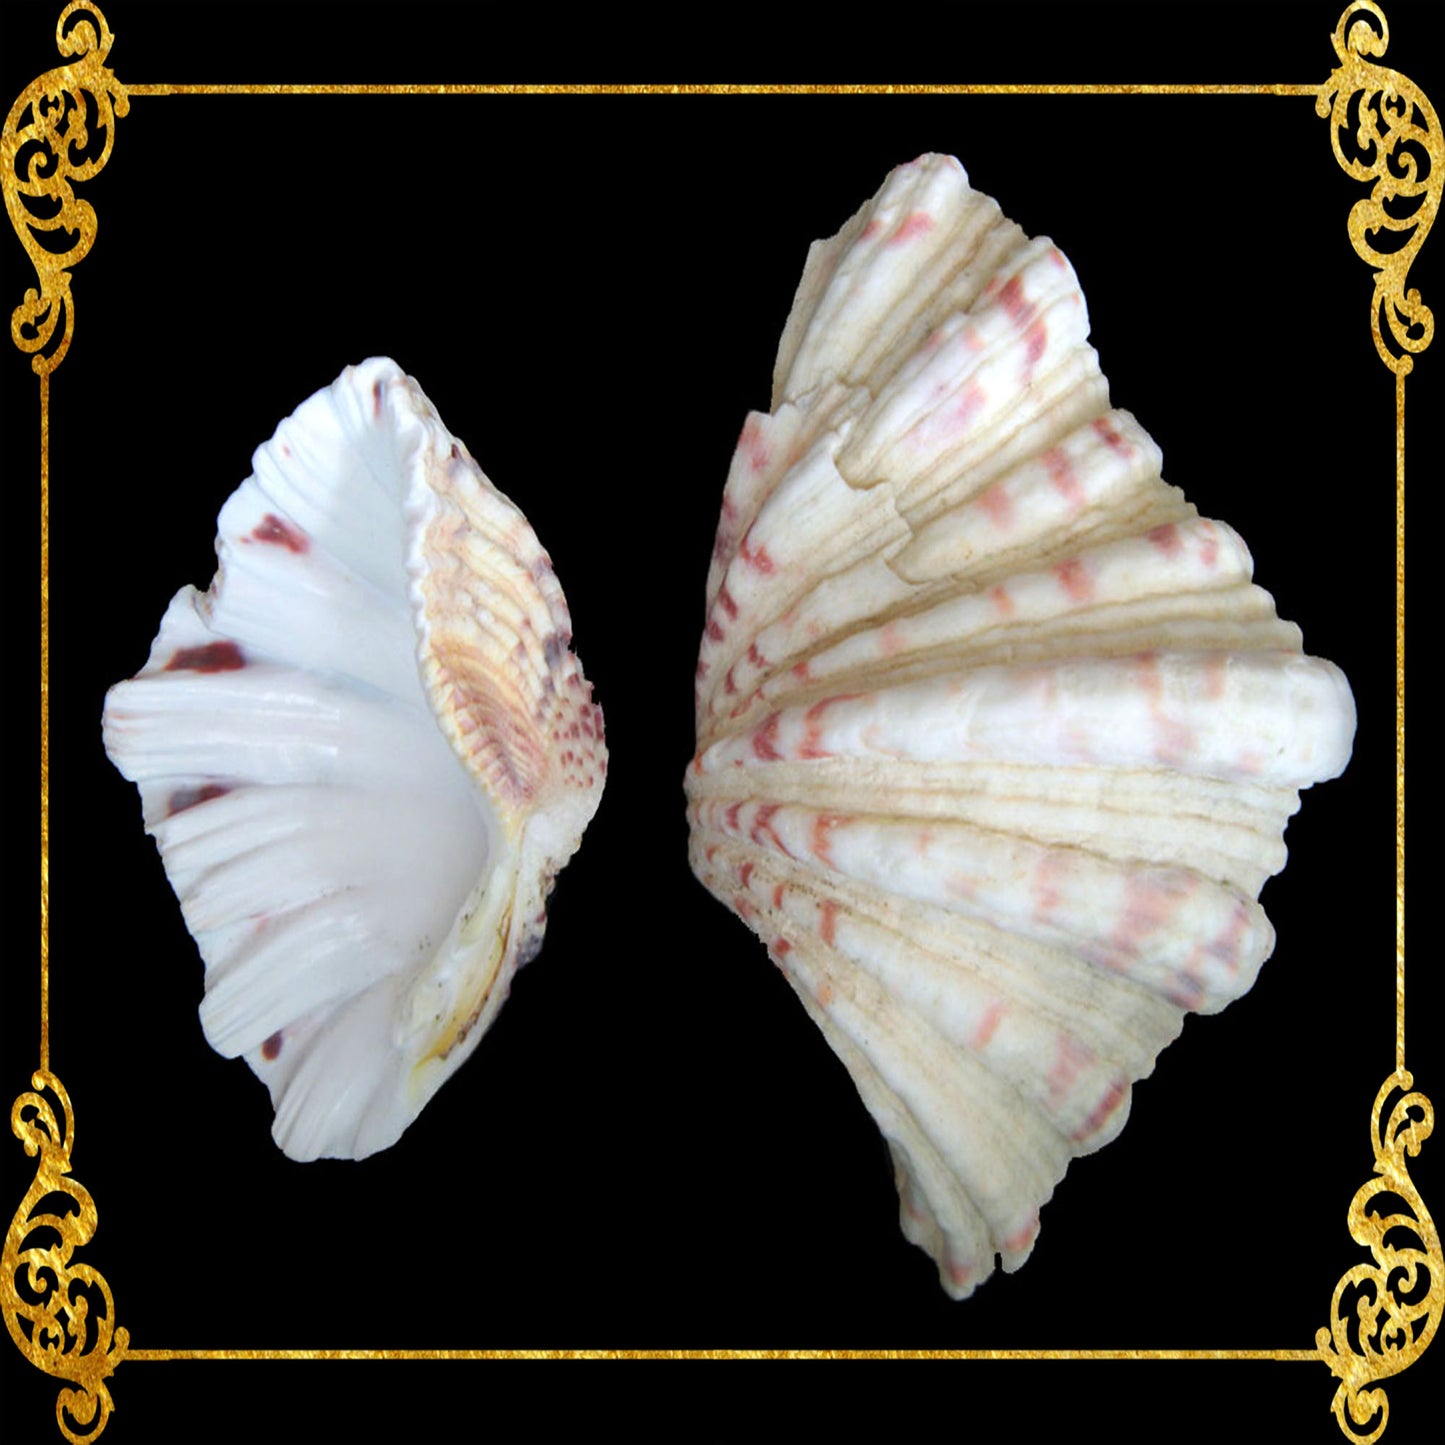 Bear Paw Clam | Hippopus Clams | 1 - 4 Inches